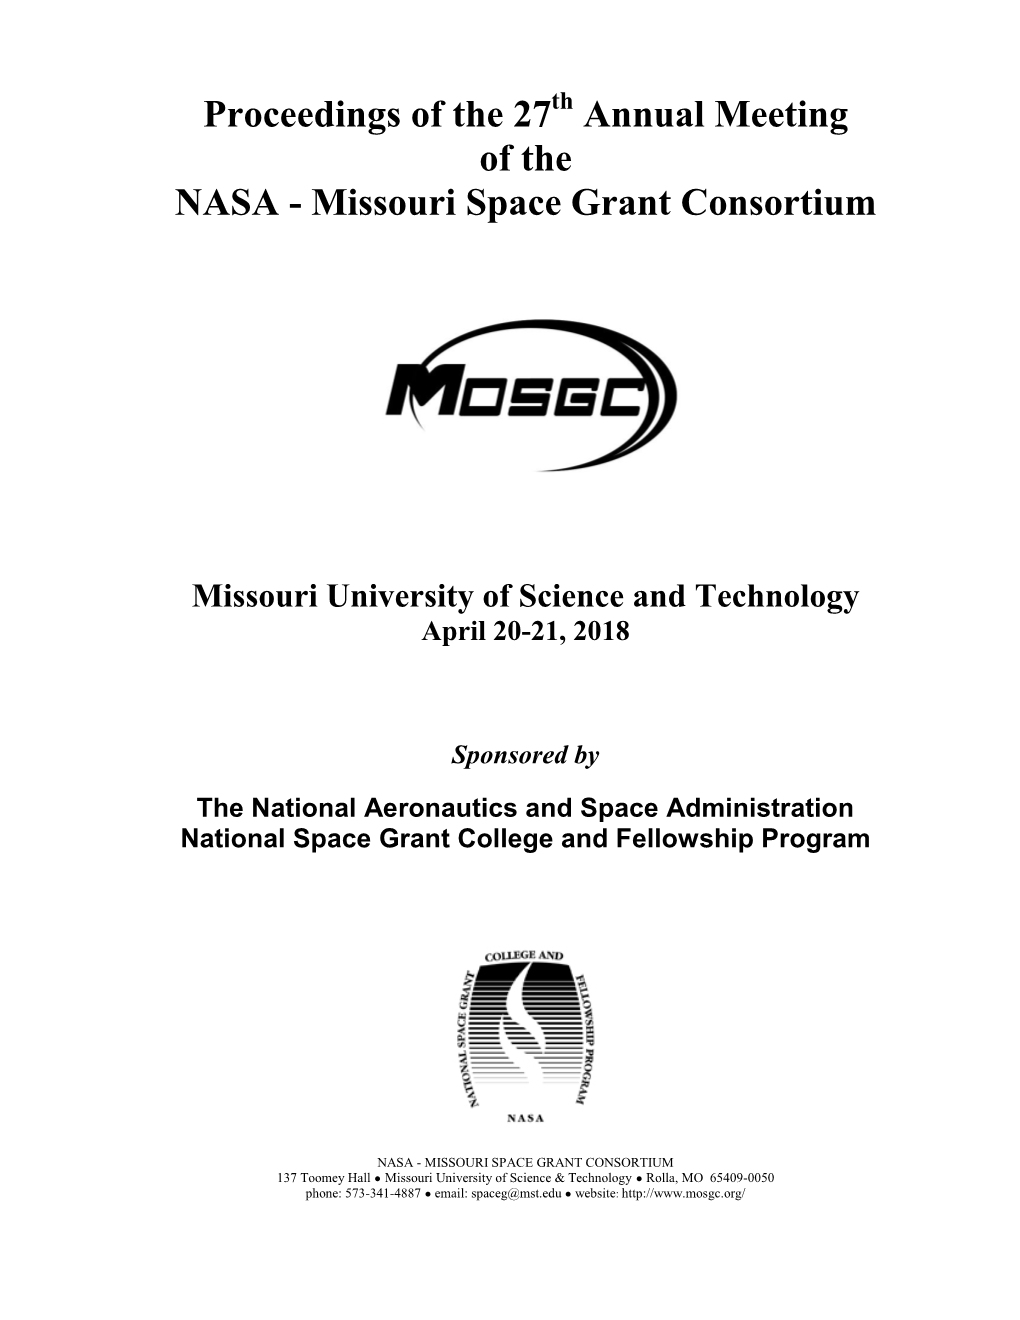 The 27Th Annual Spring Meeting of the NASA-Missouri